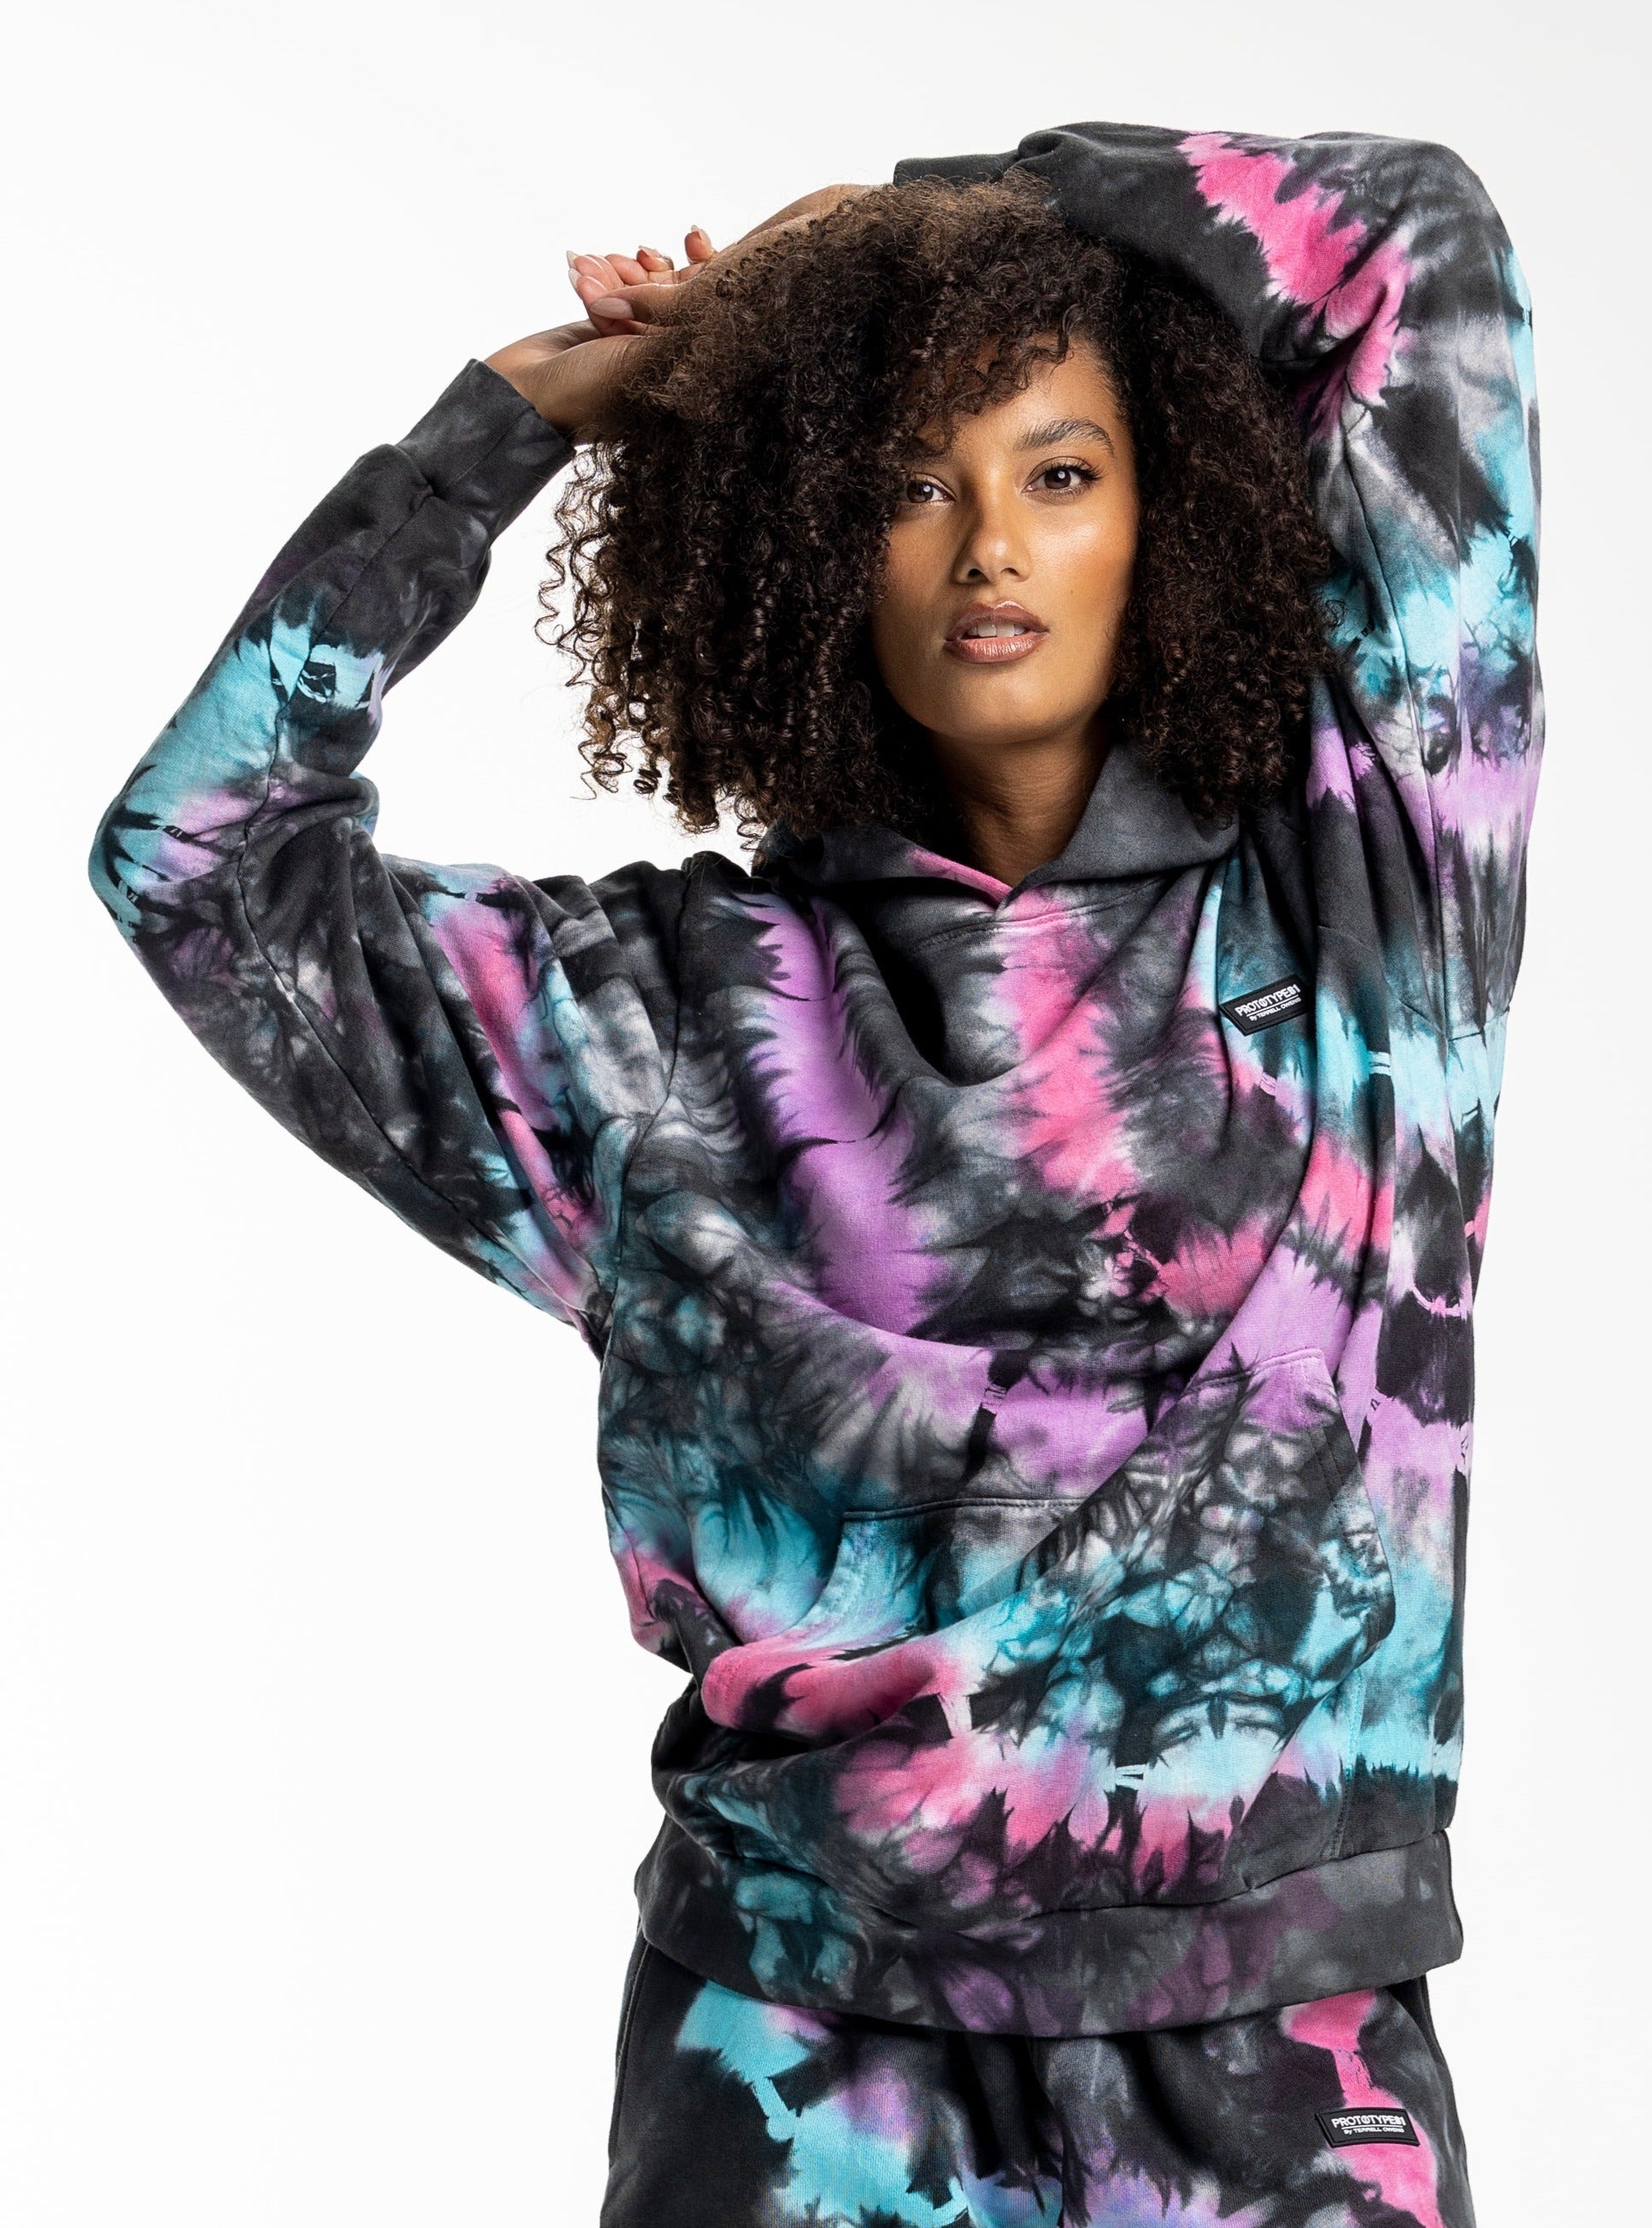 Powder Hoodie Pink Tie Dye Pink with Blue Tie Dye (Cotton Candy detail) / Jackson Hole / S